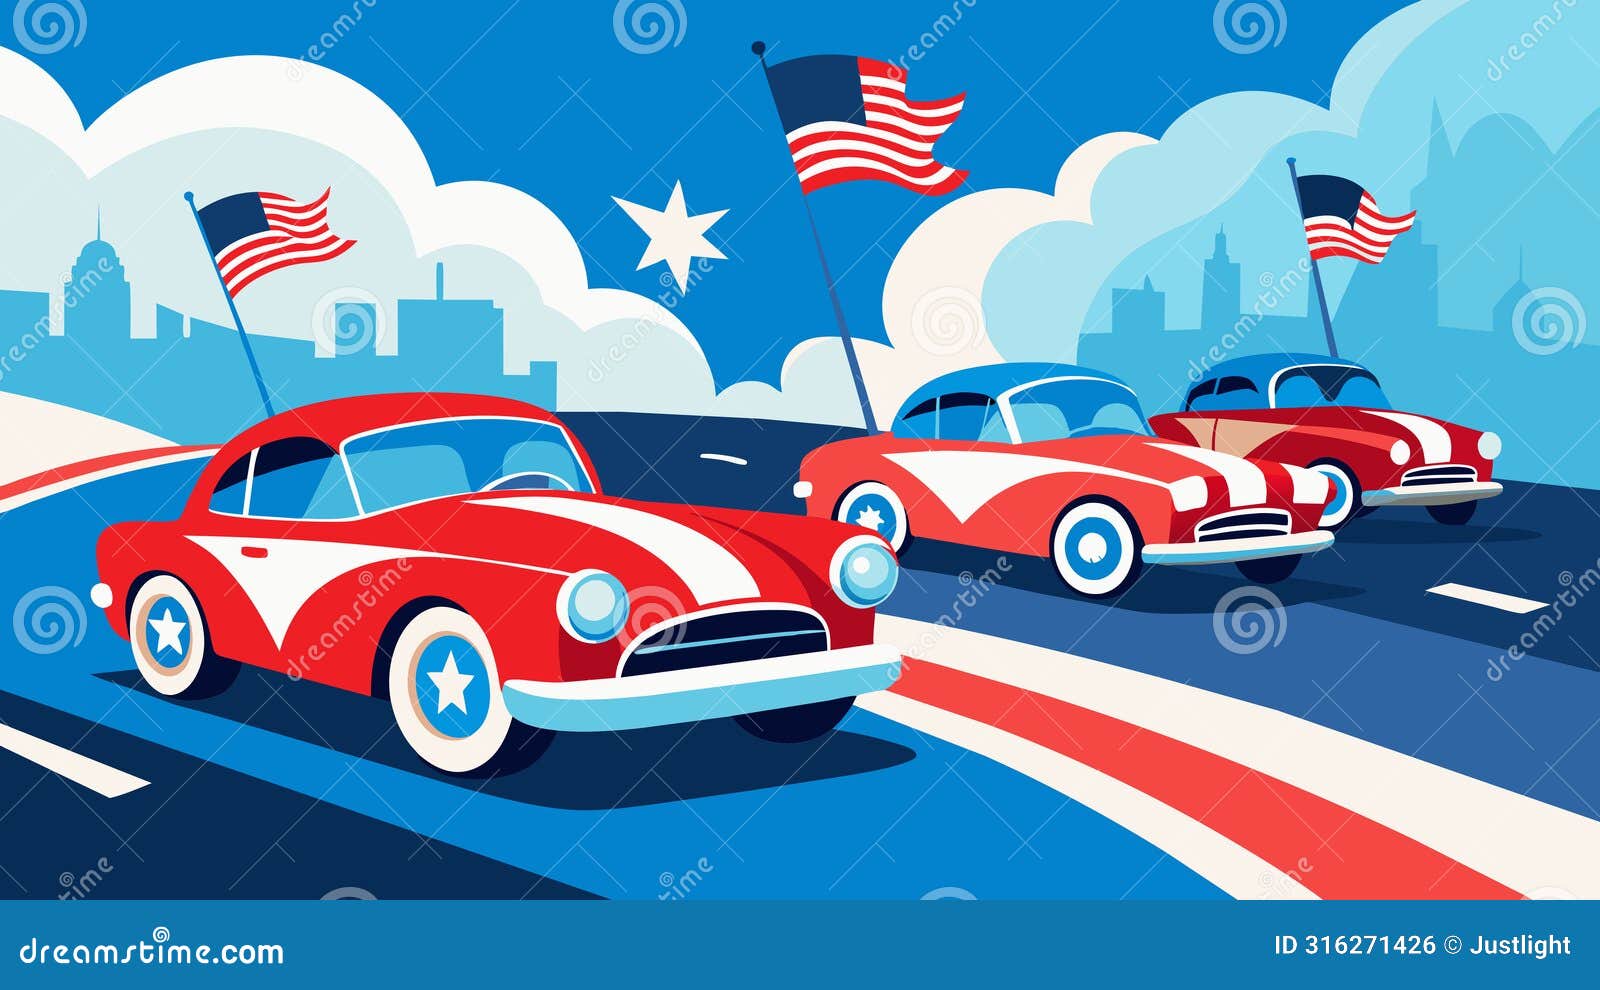 the charming red white and blue adorned vintage cars evoke a sense of pride and patriotism as they cruise along the